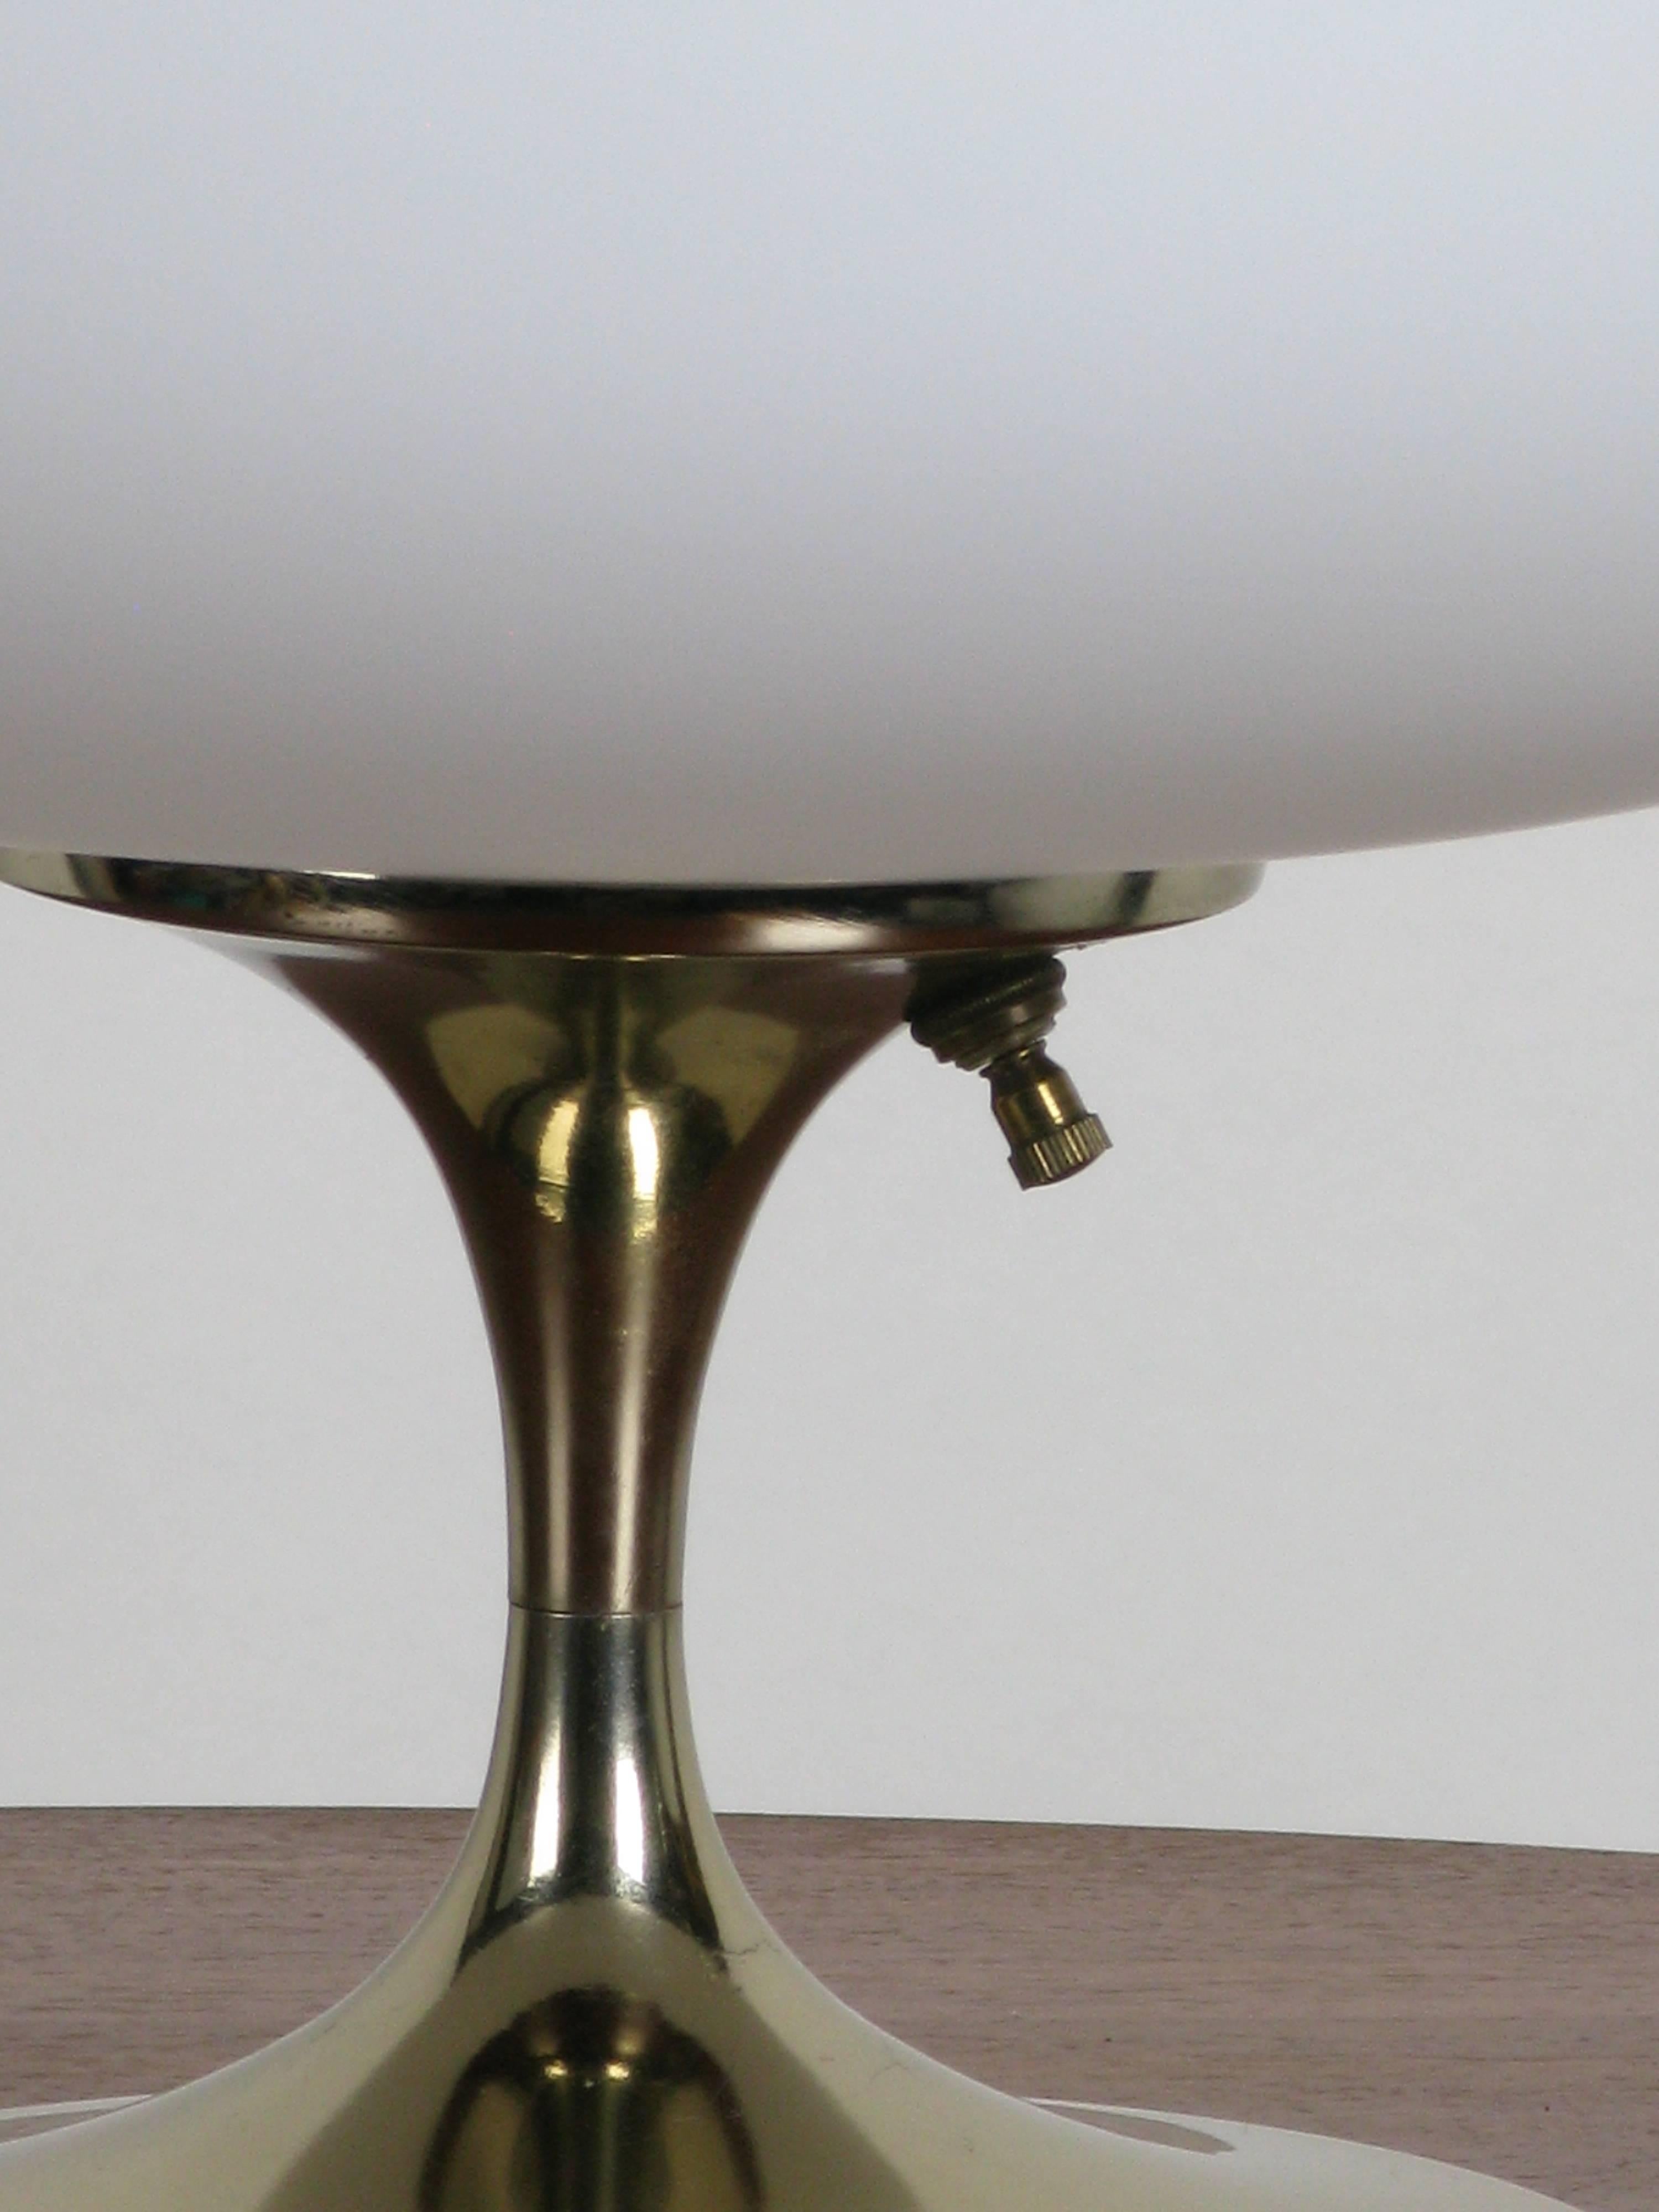 C.1970, brass base lamp with mushroom style, frosted glass shade, and 3-way switch by Laurel.  Retain original Laurel Lamp Company paper label.  